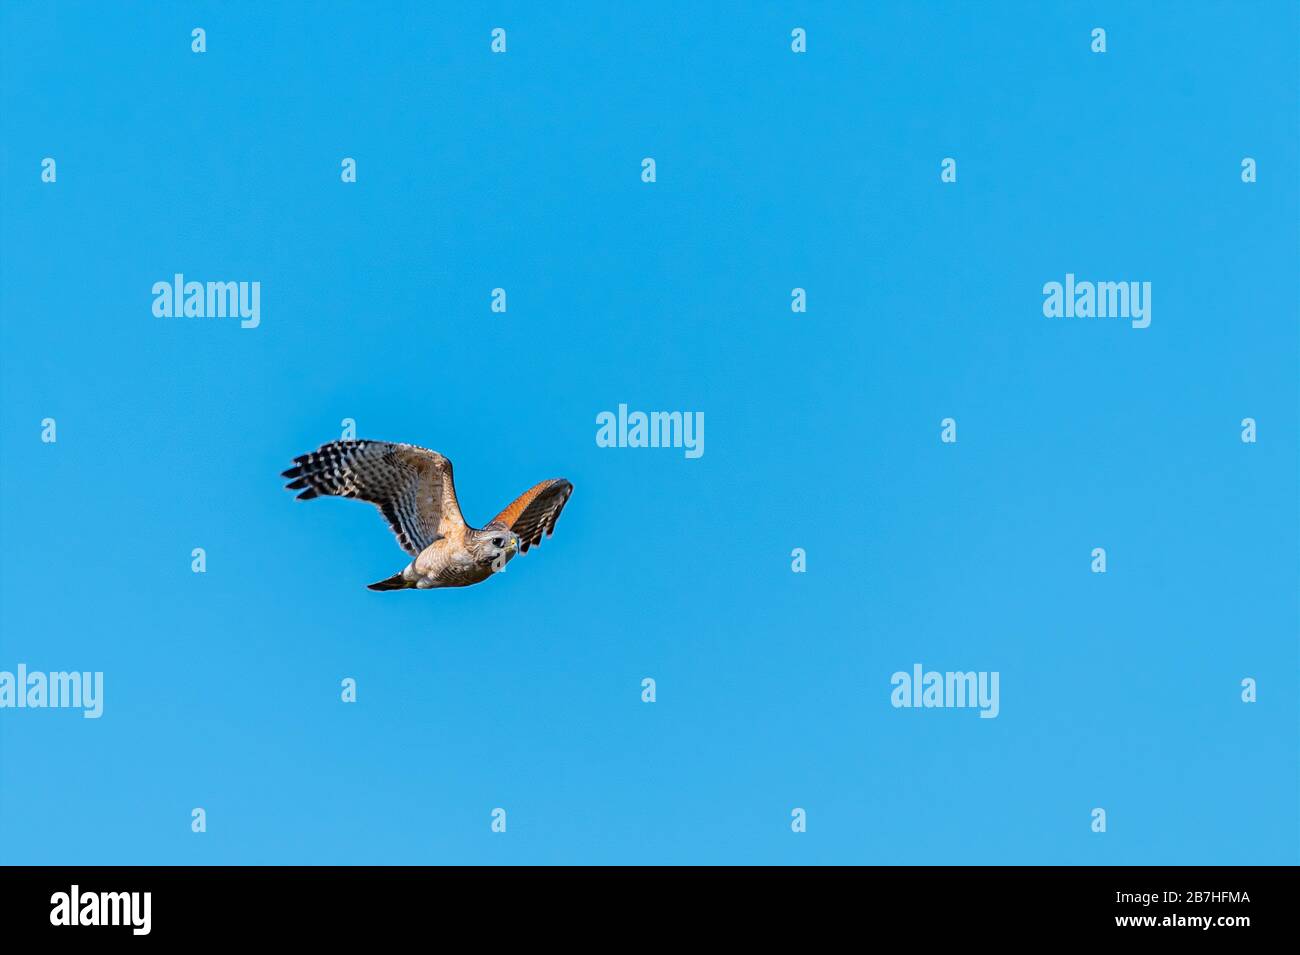 A Red-shouldered Hawk (Buteo lineatus) flying against a clear blue sky in Ritch Grissom Memorial Wetlands in Viera, Florida, USA. Stock Photo